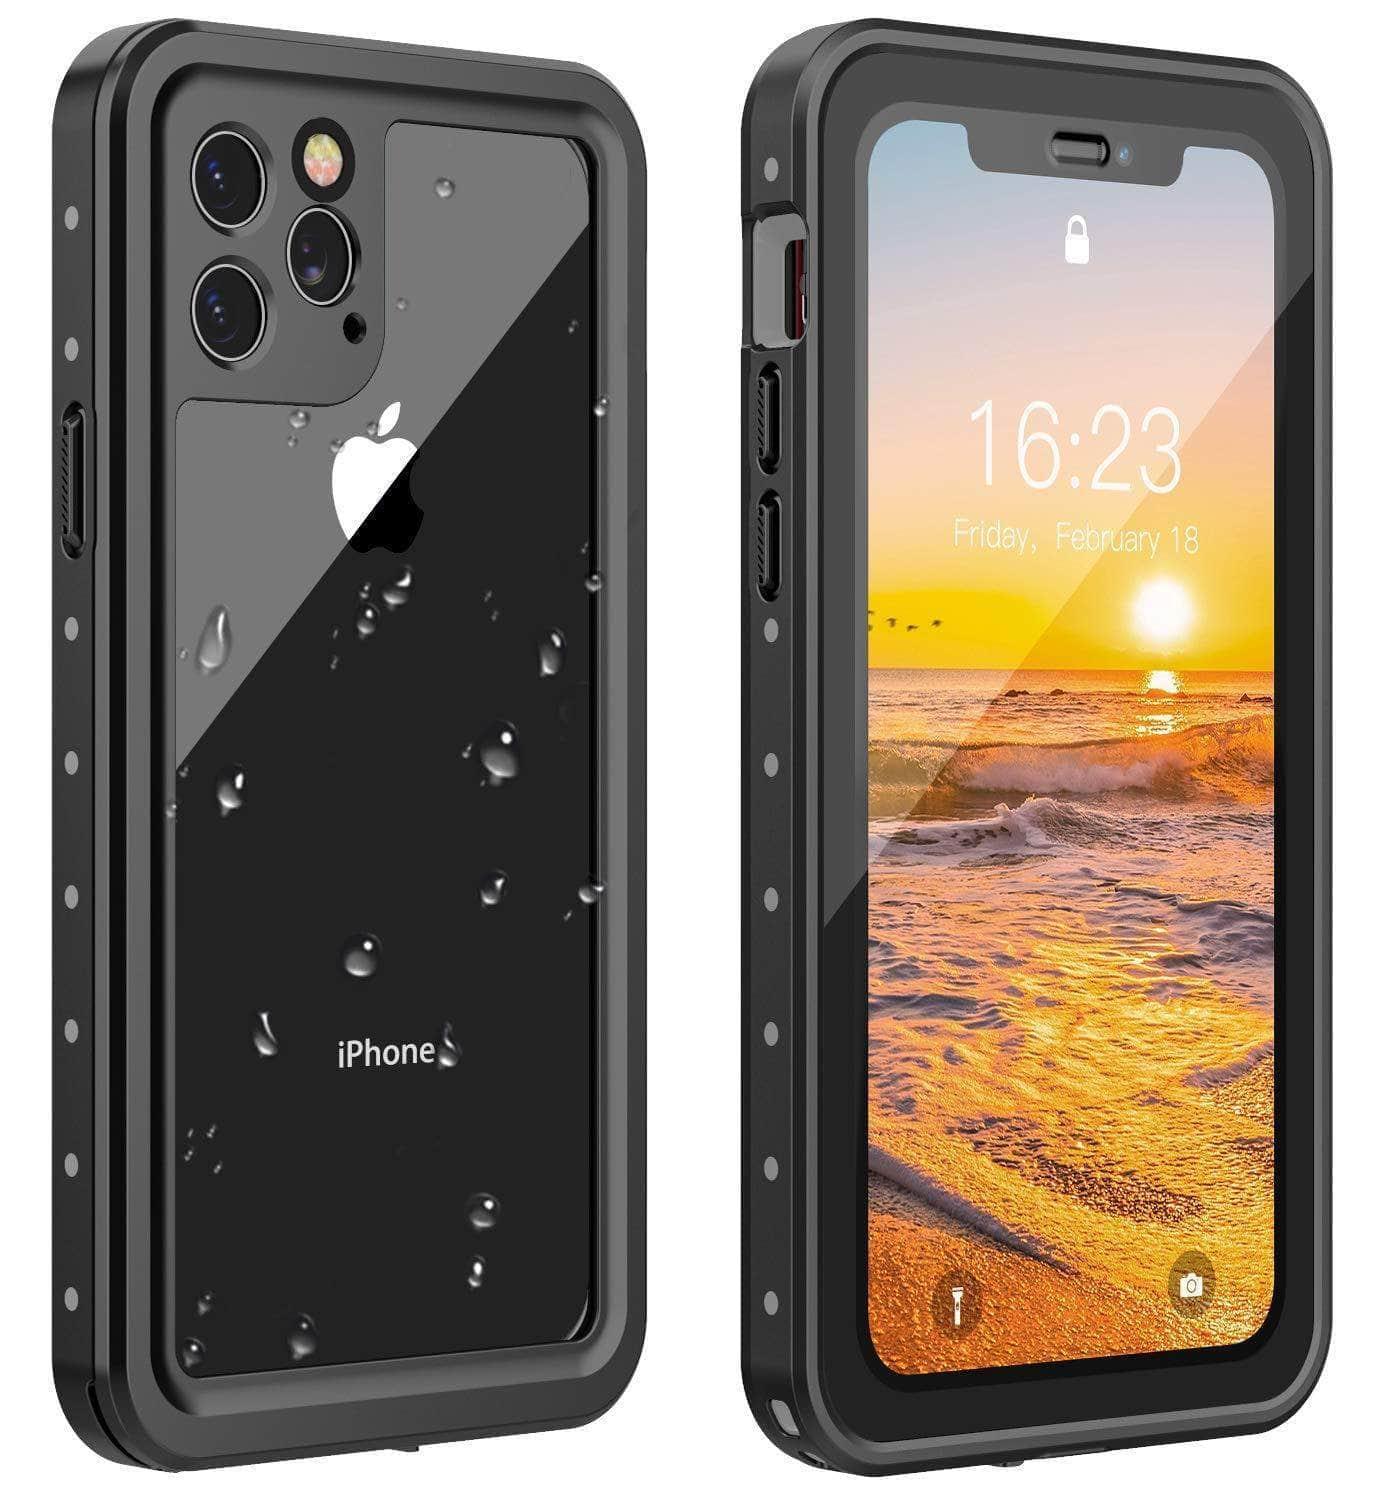 CaseBuddy Casebuddy iPhone 11 Waterproof Case Full-Body Rugged Built-in Screen Protector